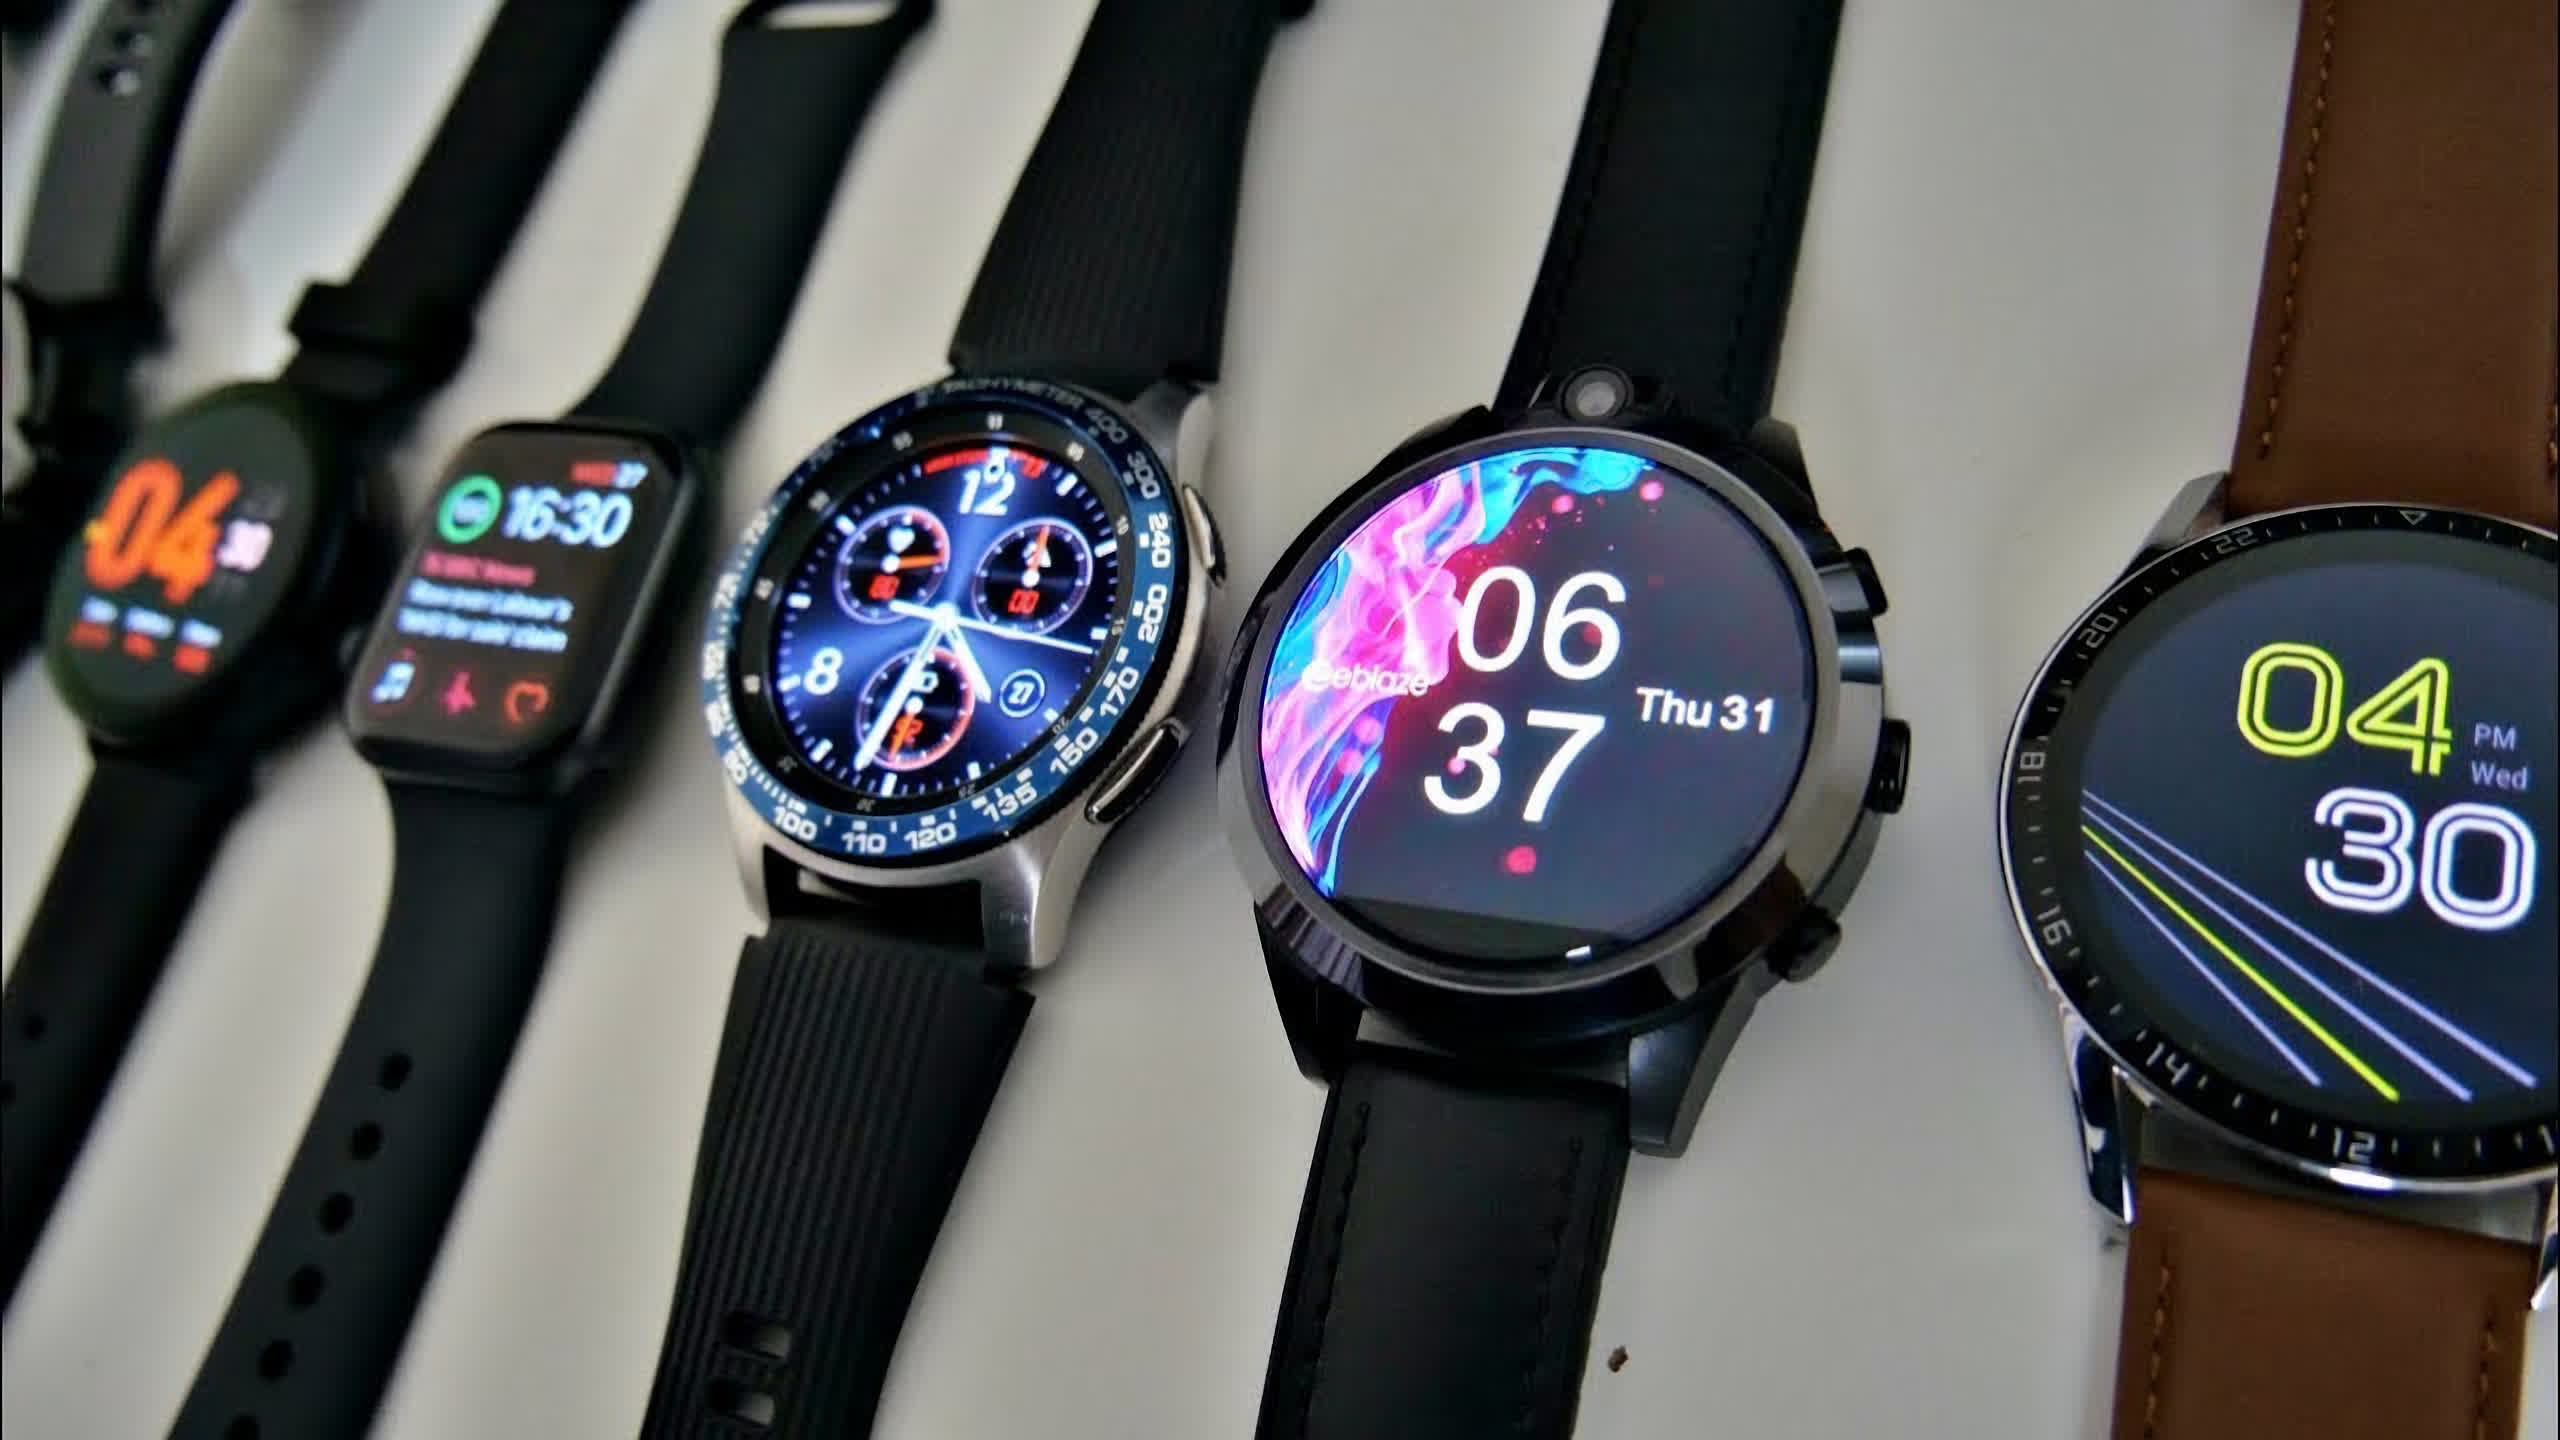 Scam alert: If you received an unsolicited smartwatch in the mail, don't turn it on